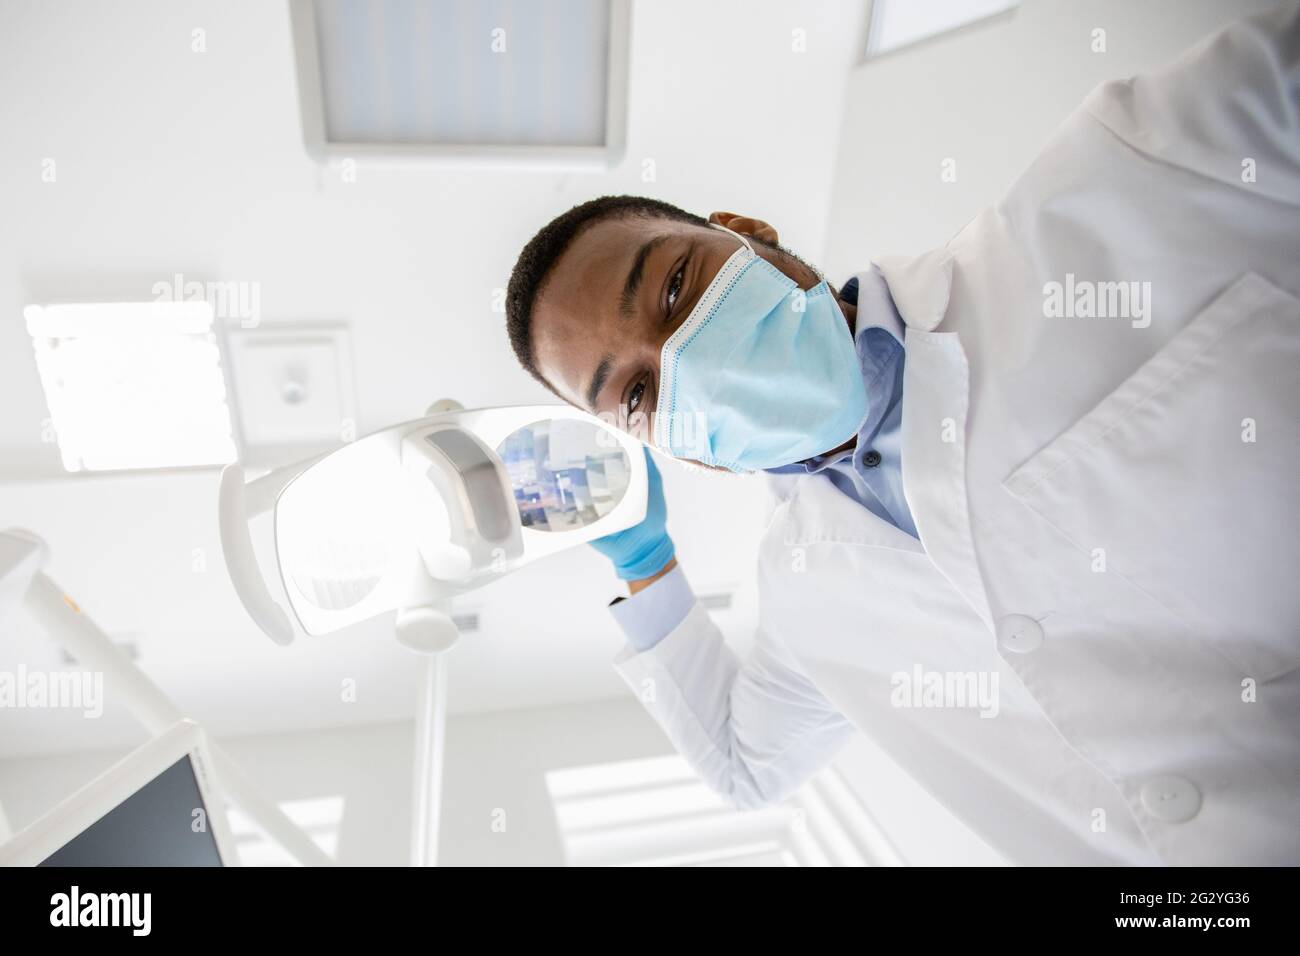 Black Stomatologist Turning On Lamp Before Check Up With Patient, Low Angle Stock Photo